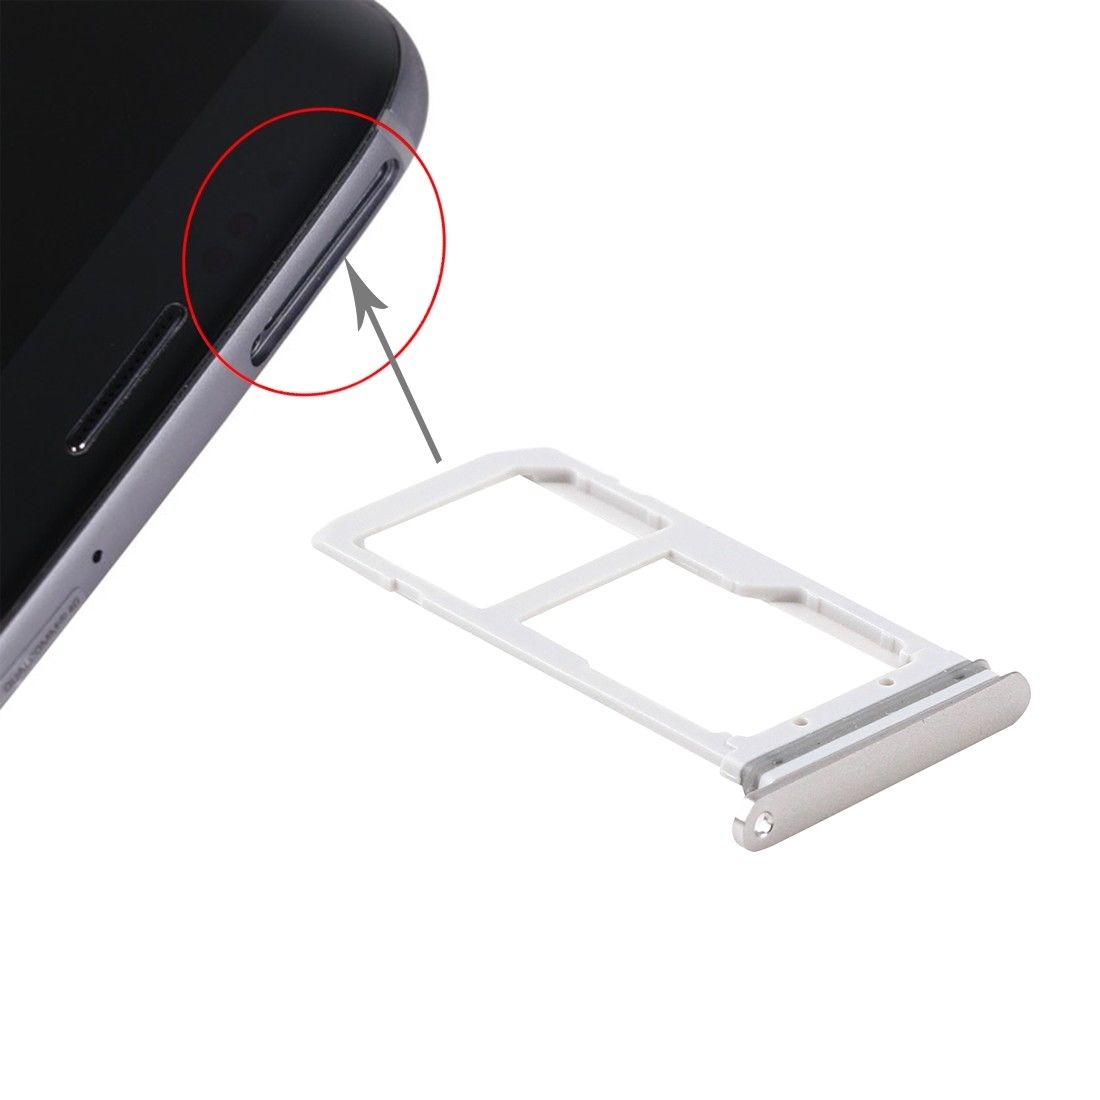 Samsung Galaxy S7 Micro SD & Nano SIM Card Tray Holder - Gold for [product_price] - First Help Tech